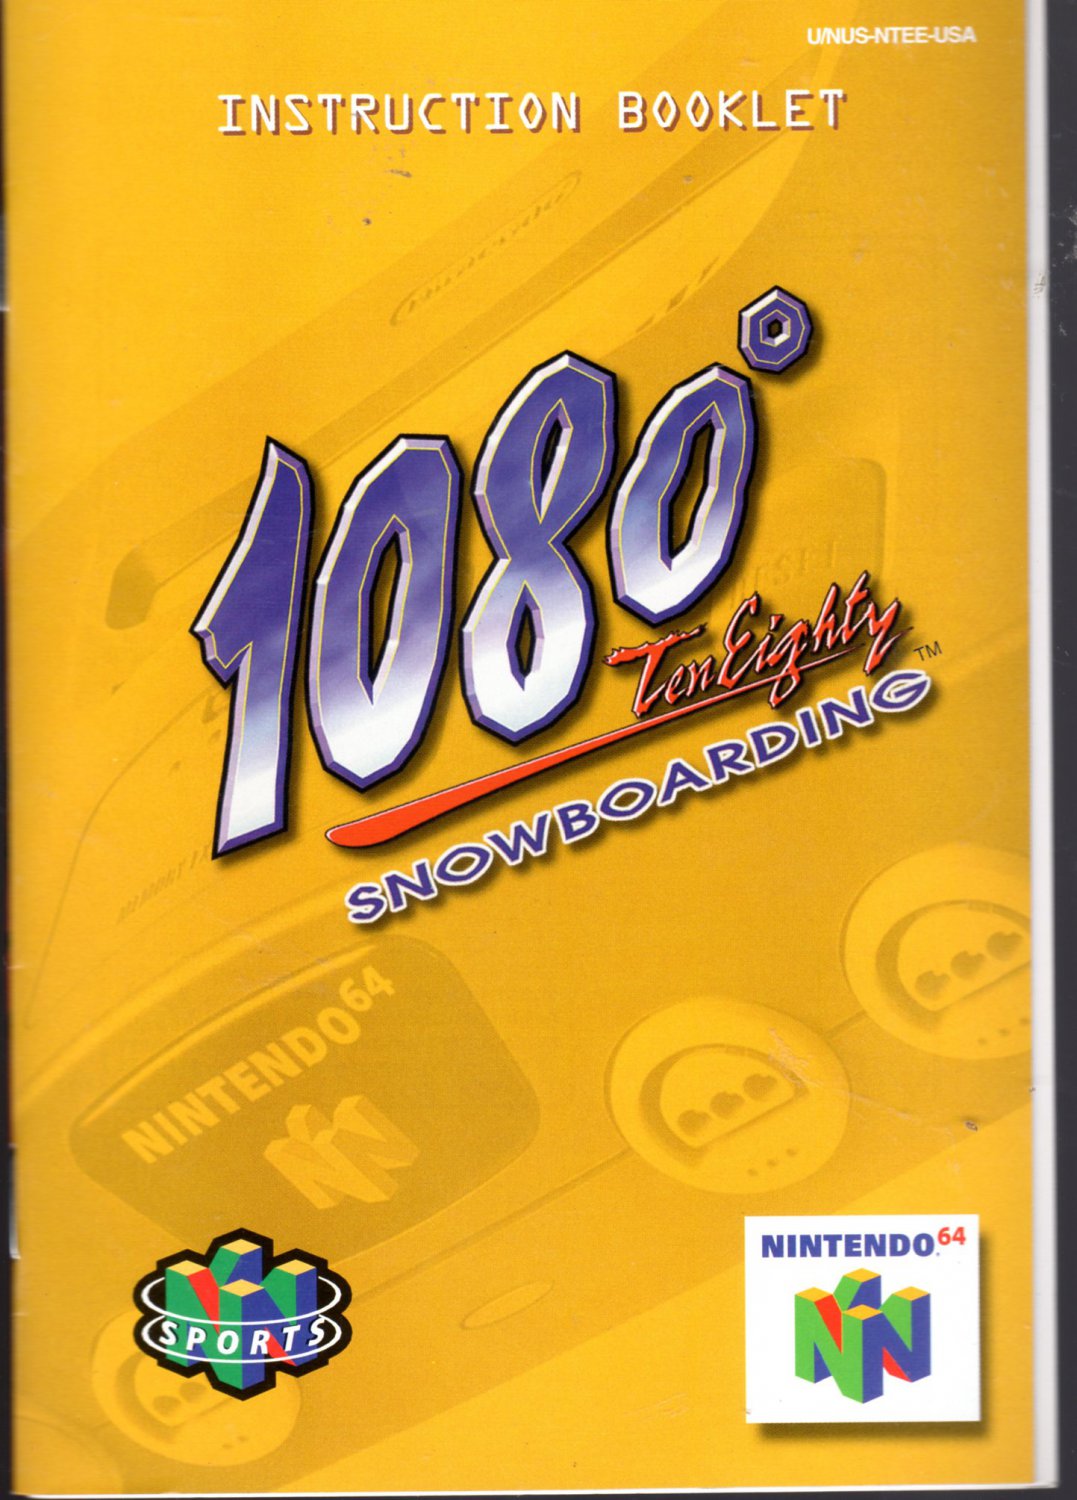 1080 Ten Eighty Snowboards Instruction Booklet ONLY